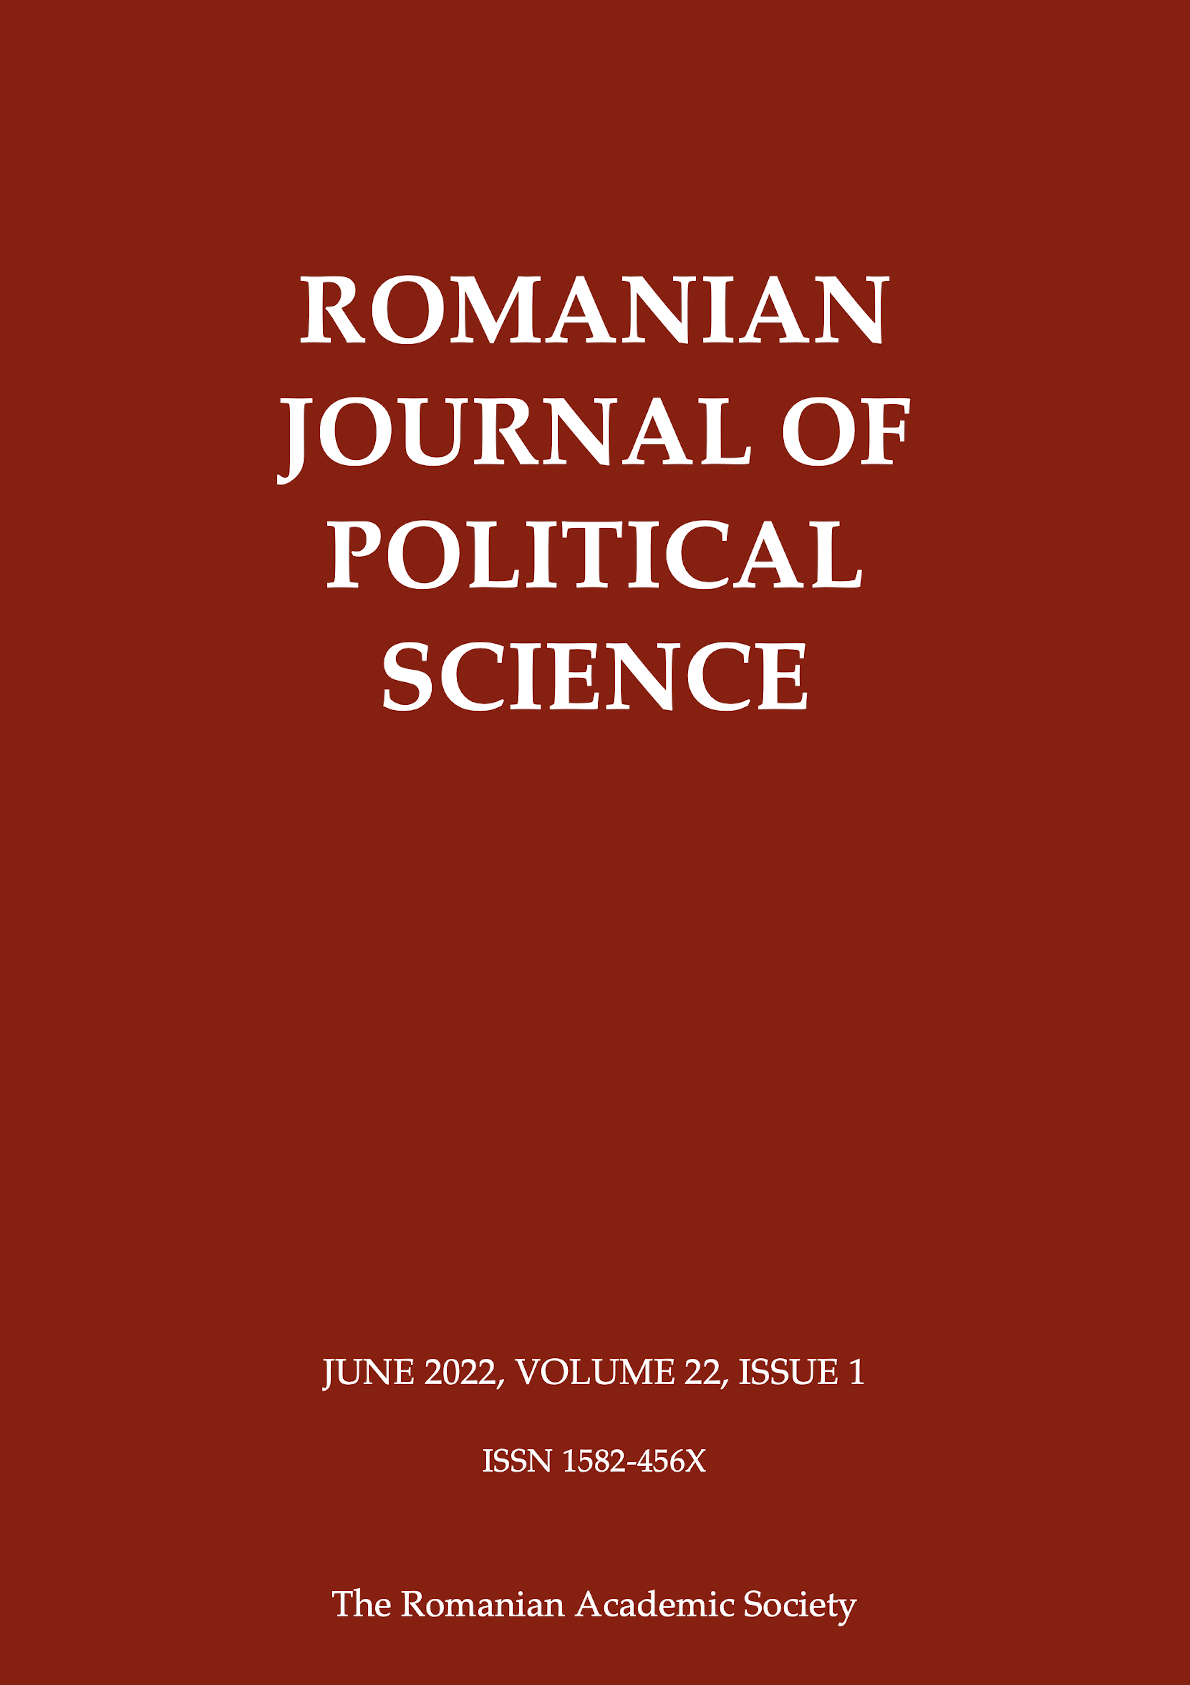 Economic disparities and clientelism in Romania. A subnational analysis